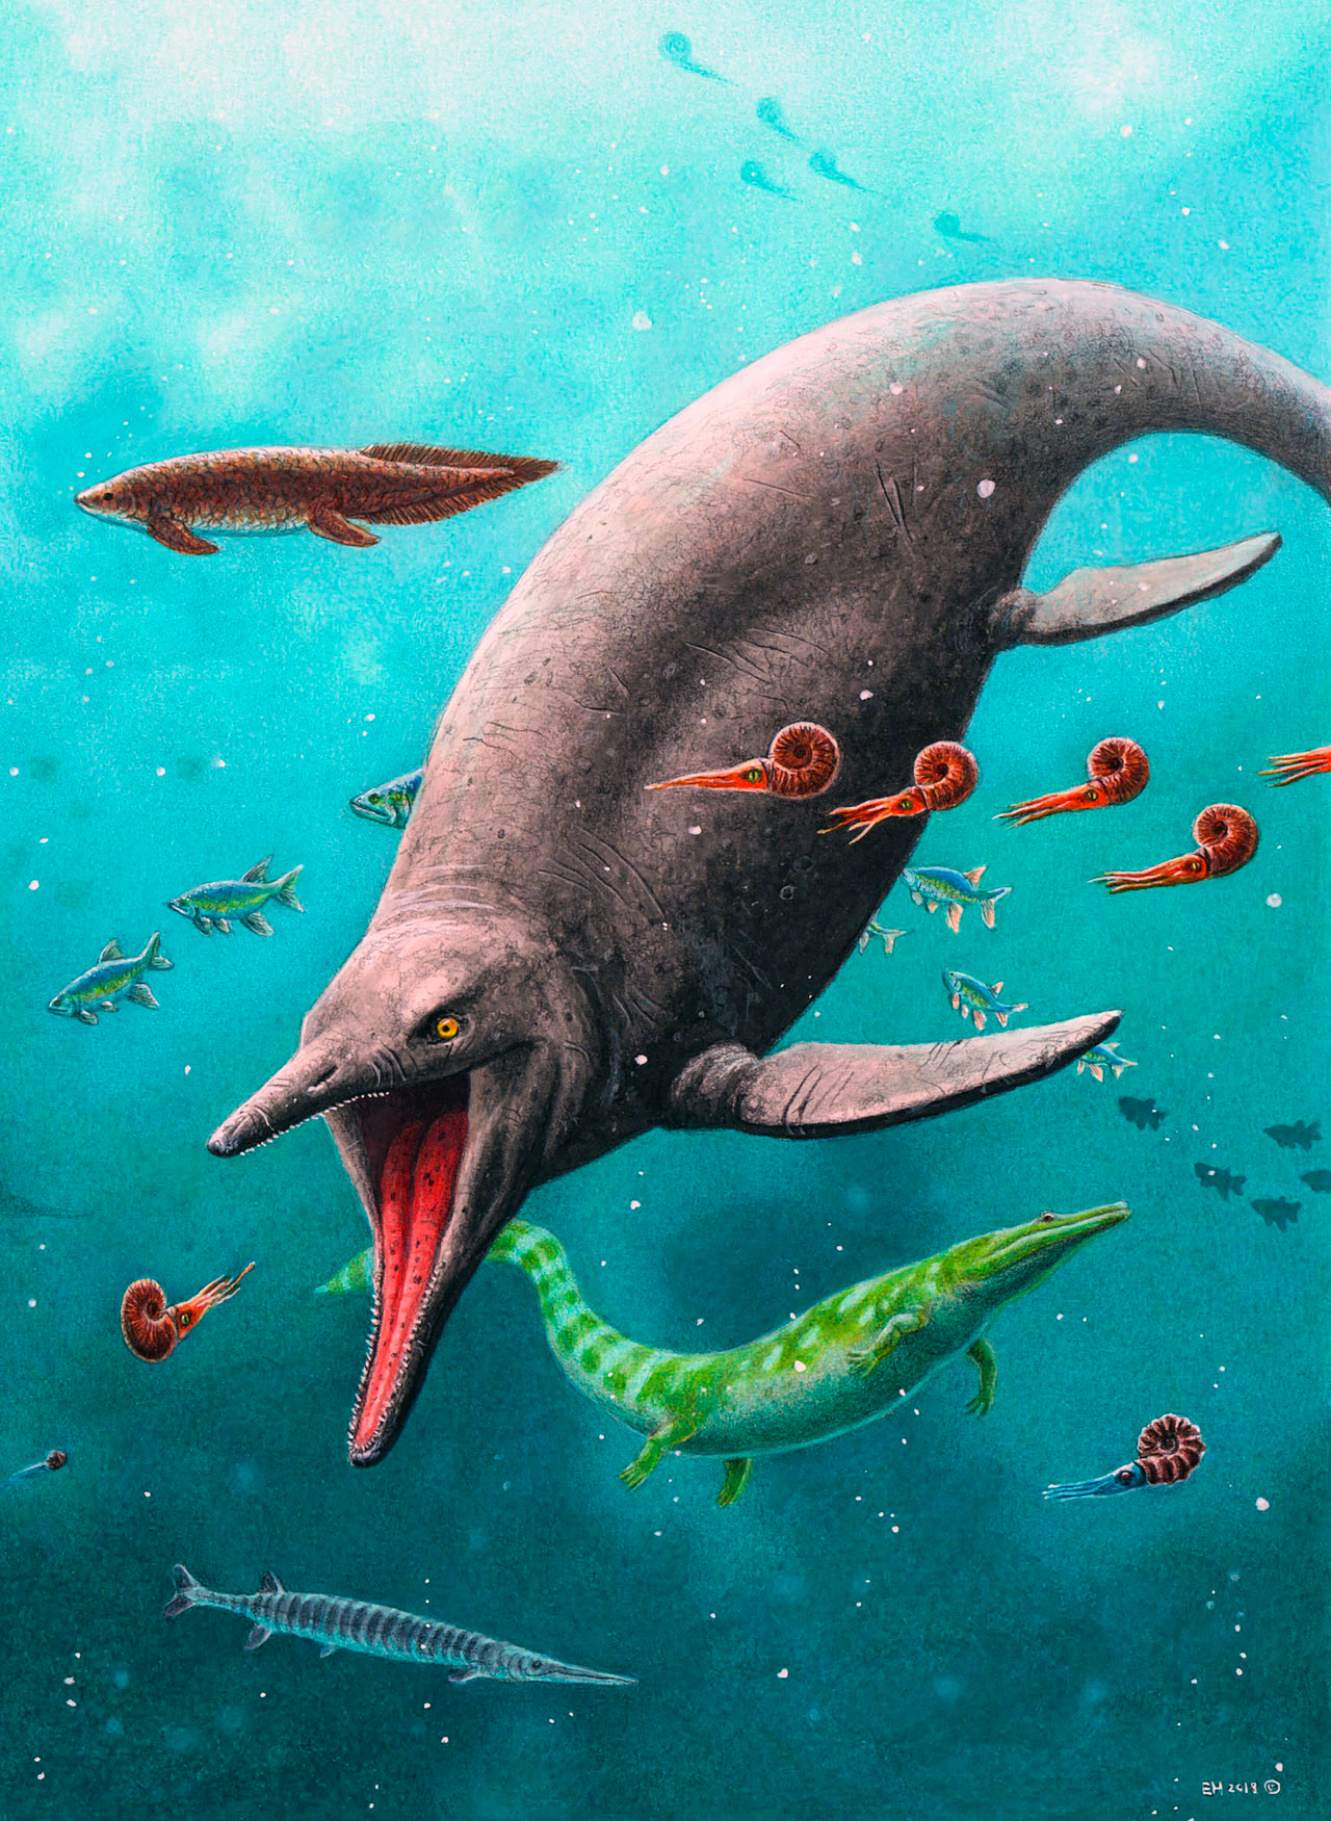 Reconstruction of the earliest ichthyosaur and the 250-million-year-old ecosystem found on Spitsbergen.